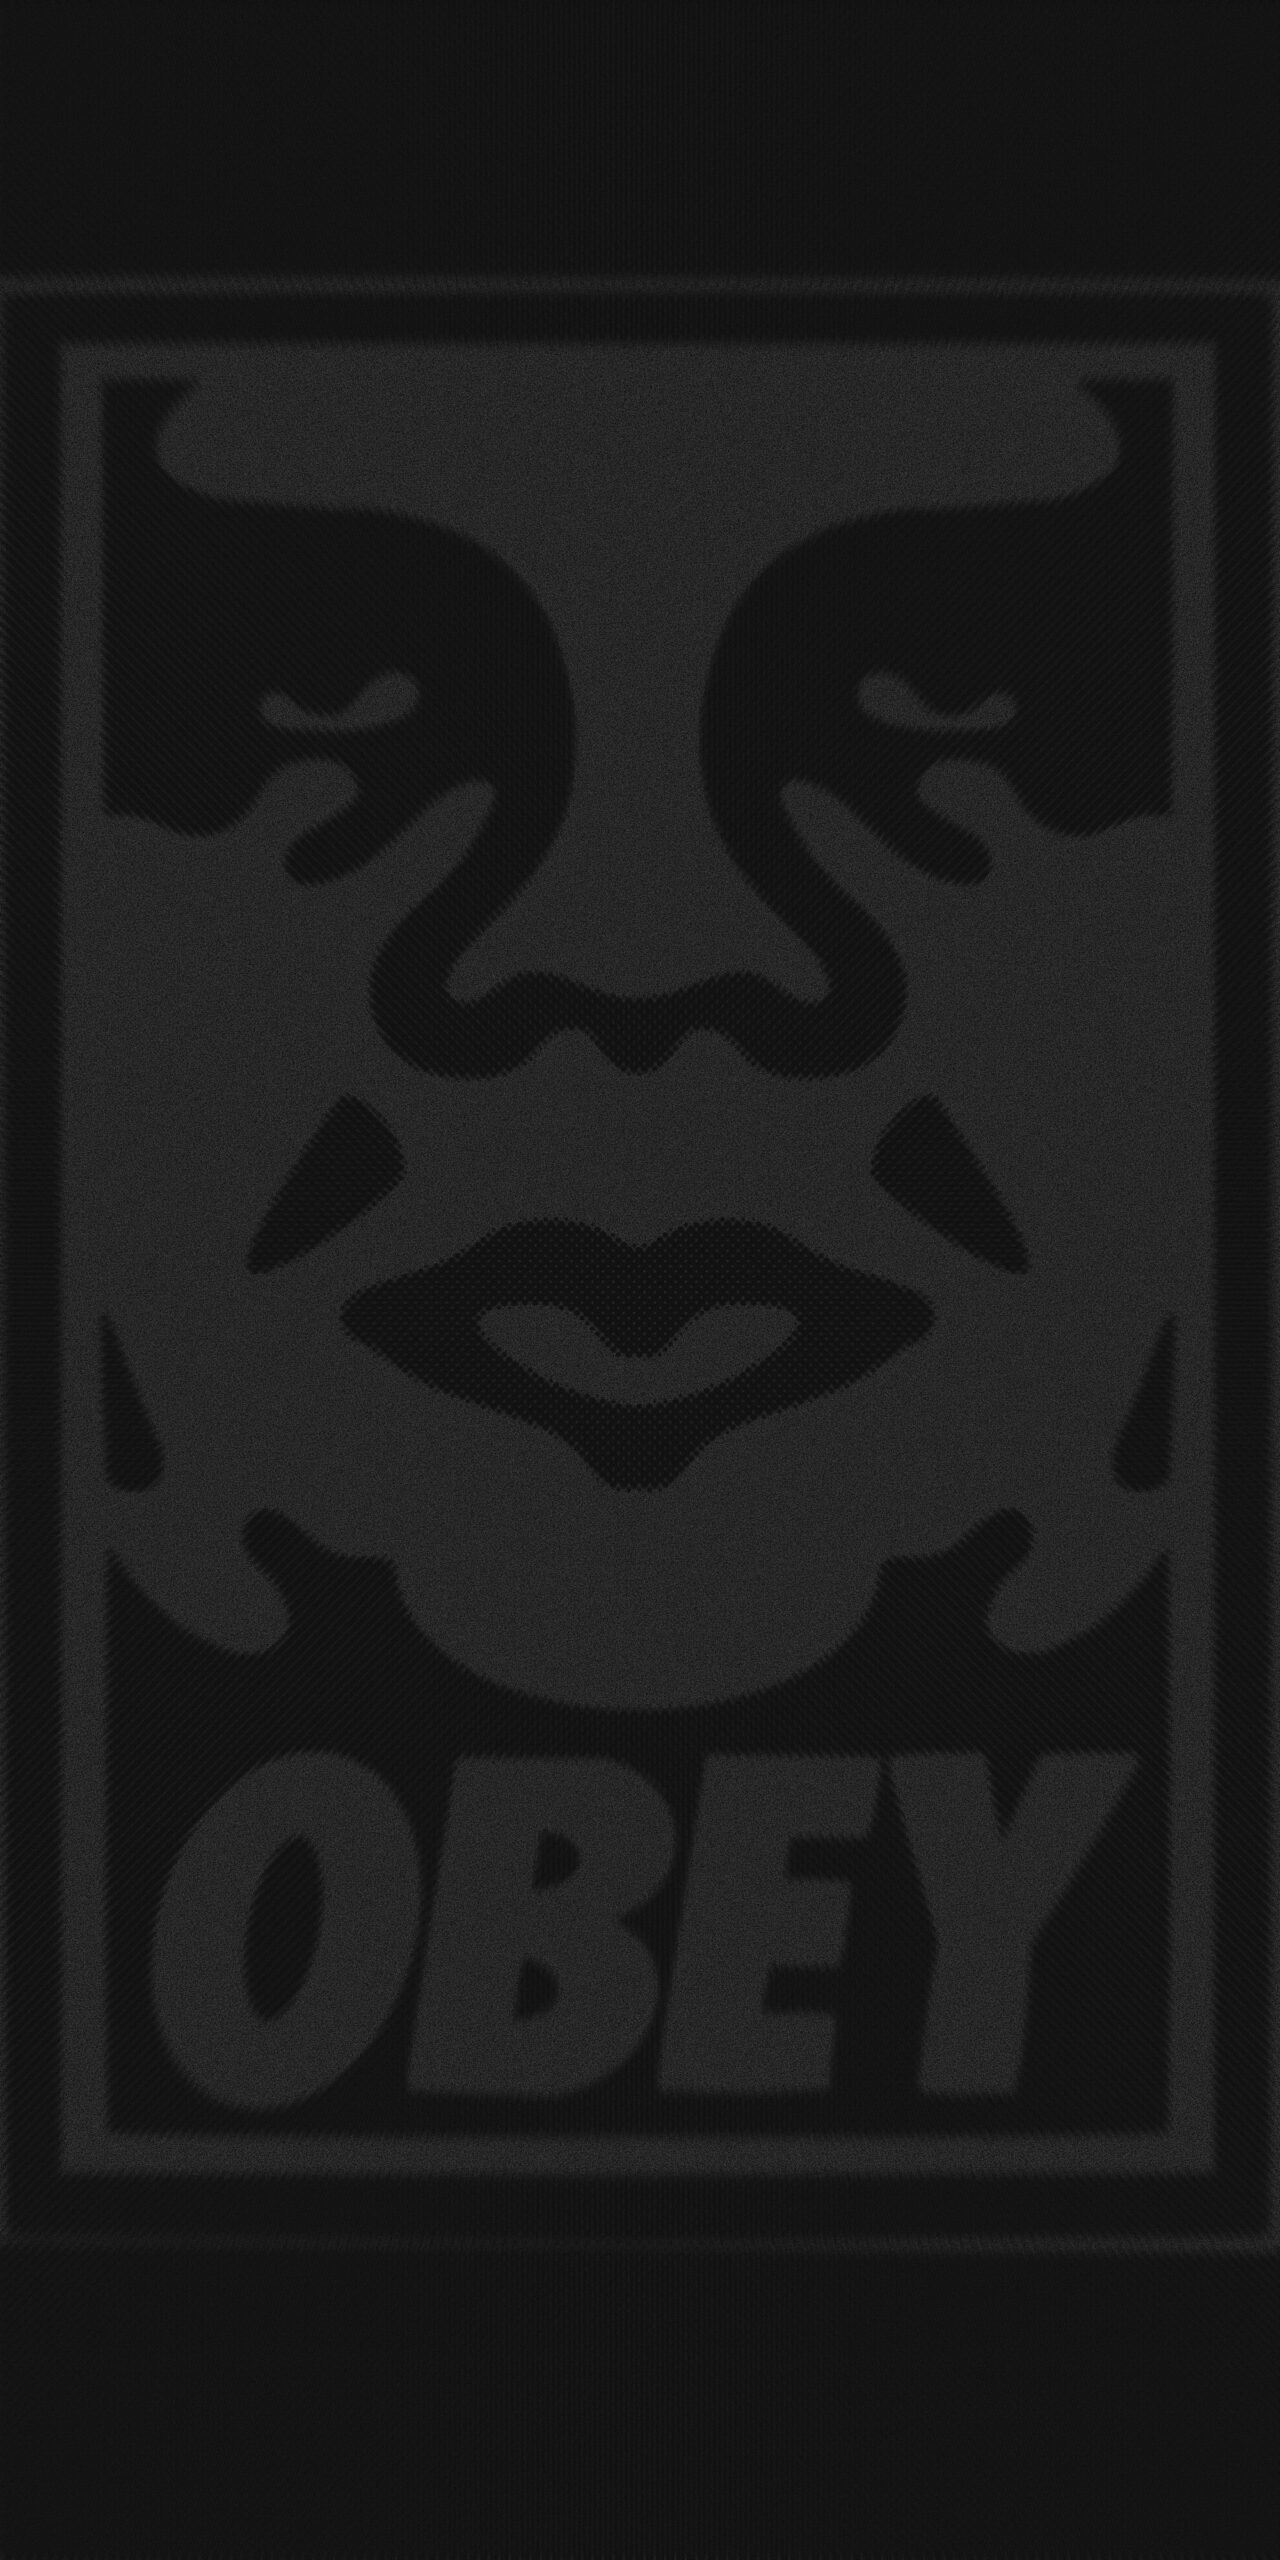 Obey Dark Wallpapers - Wallpapers Clan